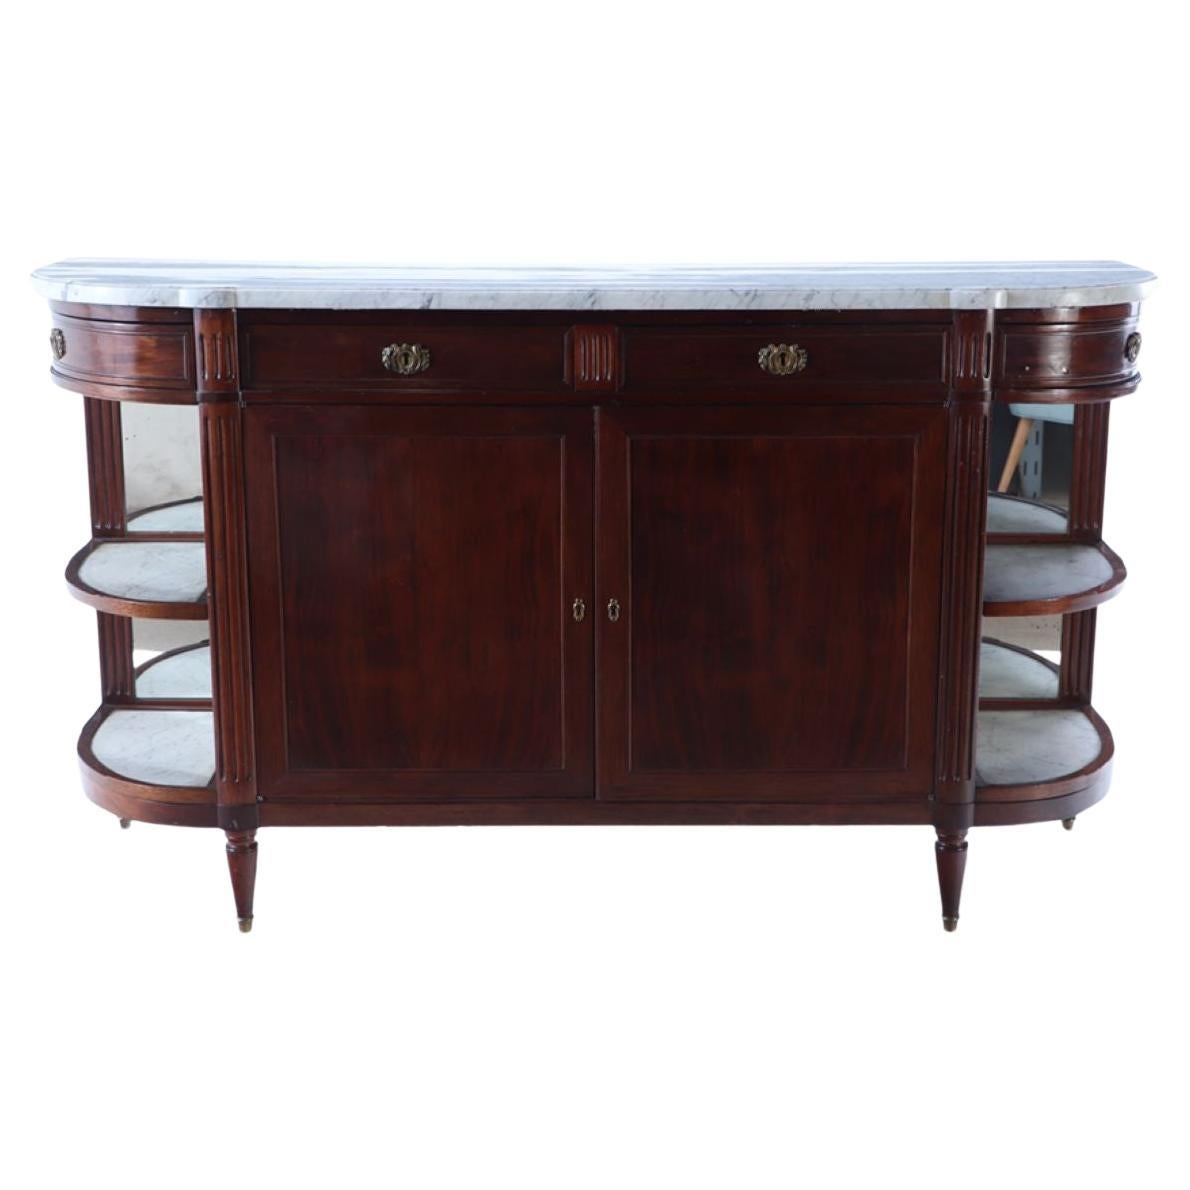 A French mahogany sideboard circa 1920 having a white marble top with open sides For Sale